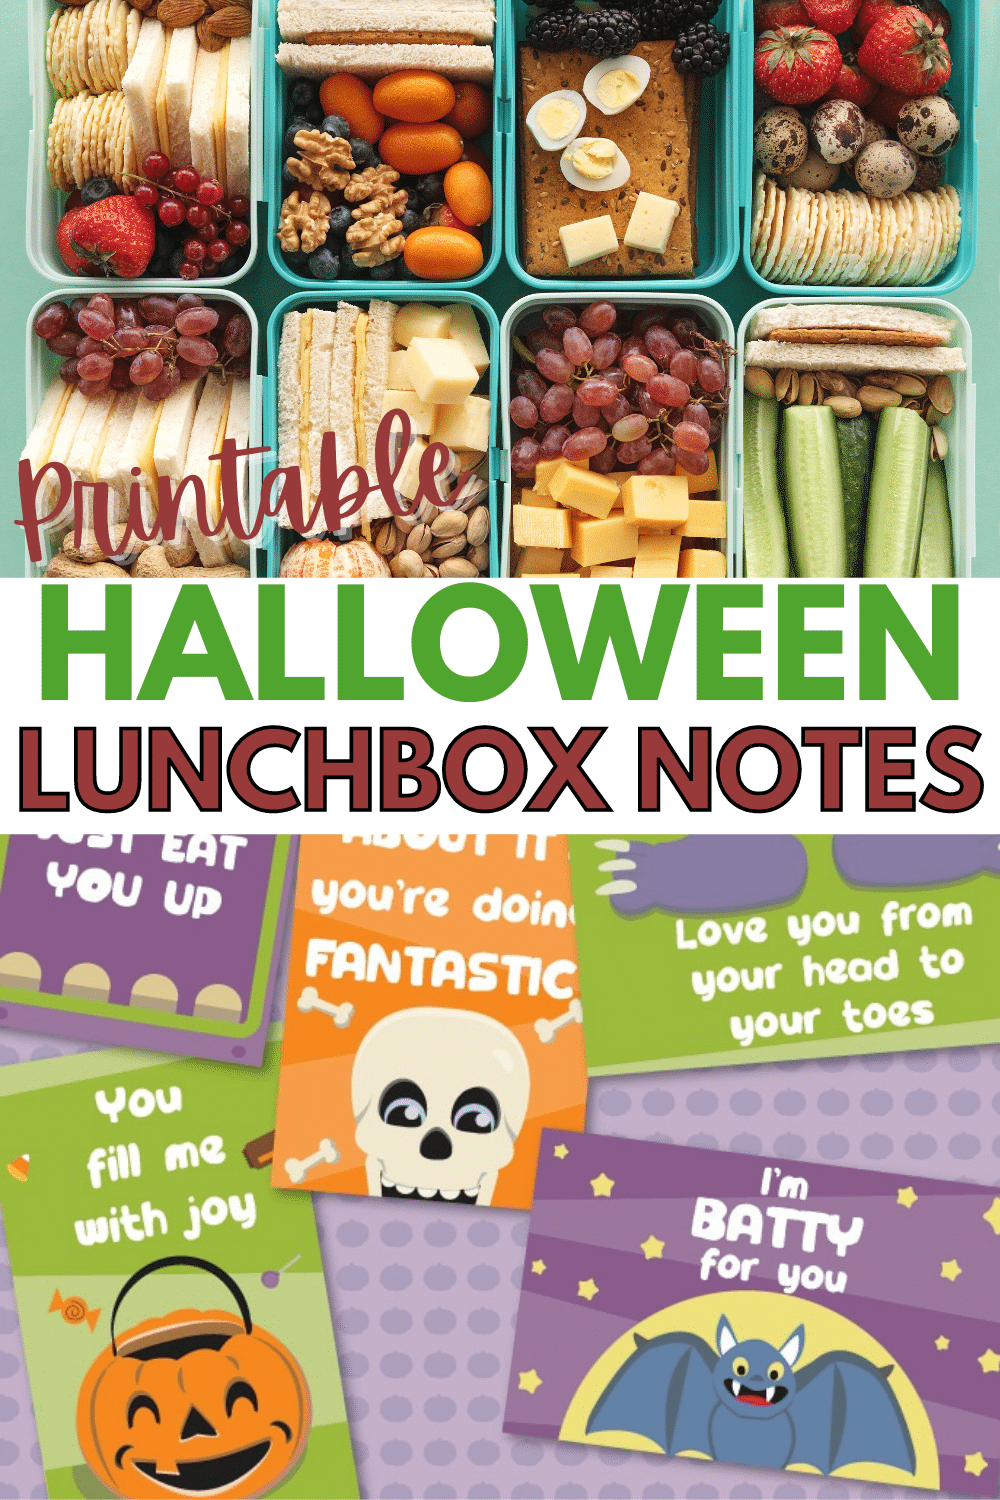 These Halloween lunchbox notes are so cute and totally free! What a fun way to treat the kids without candy the week leading up to Halloween. #halloween #printables #lunchnotes via @wondermomwannab